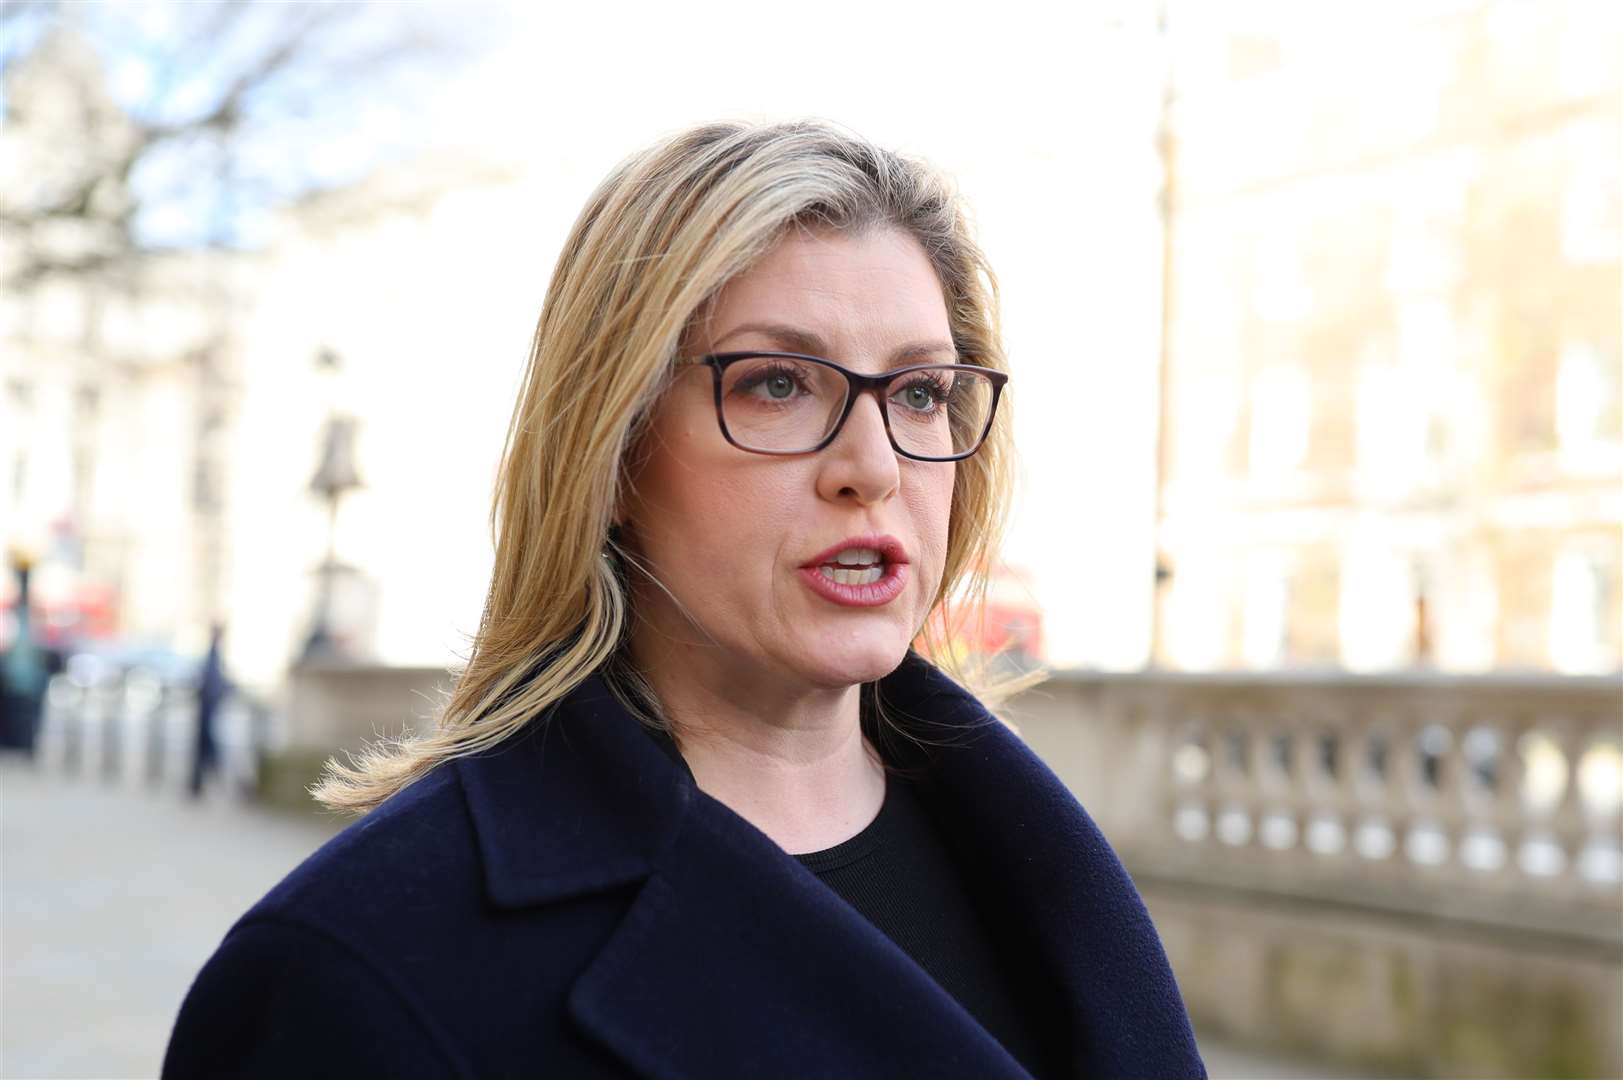 Trade minister Penny Mordaunt said a decision on extending quotas on steel imports was expected ‘very shortly’ (Aaron Chown/PA)